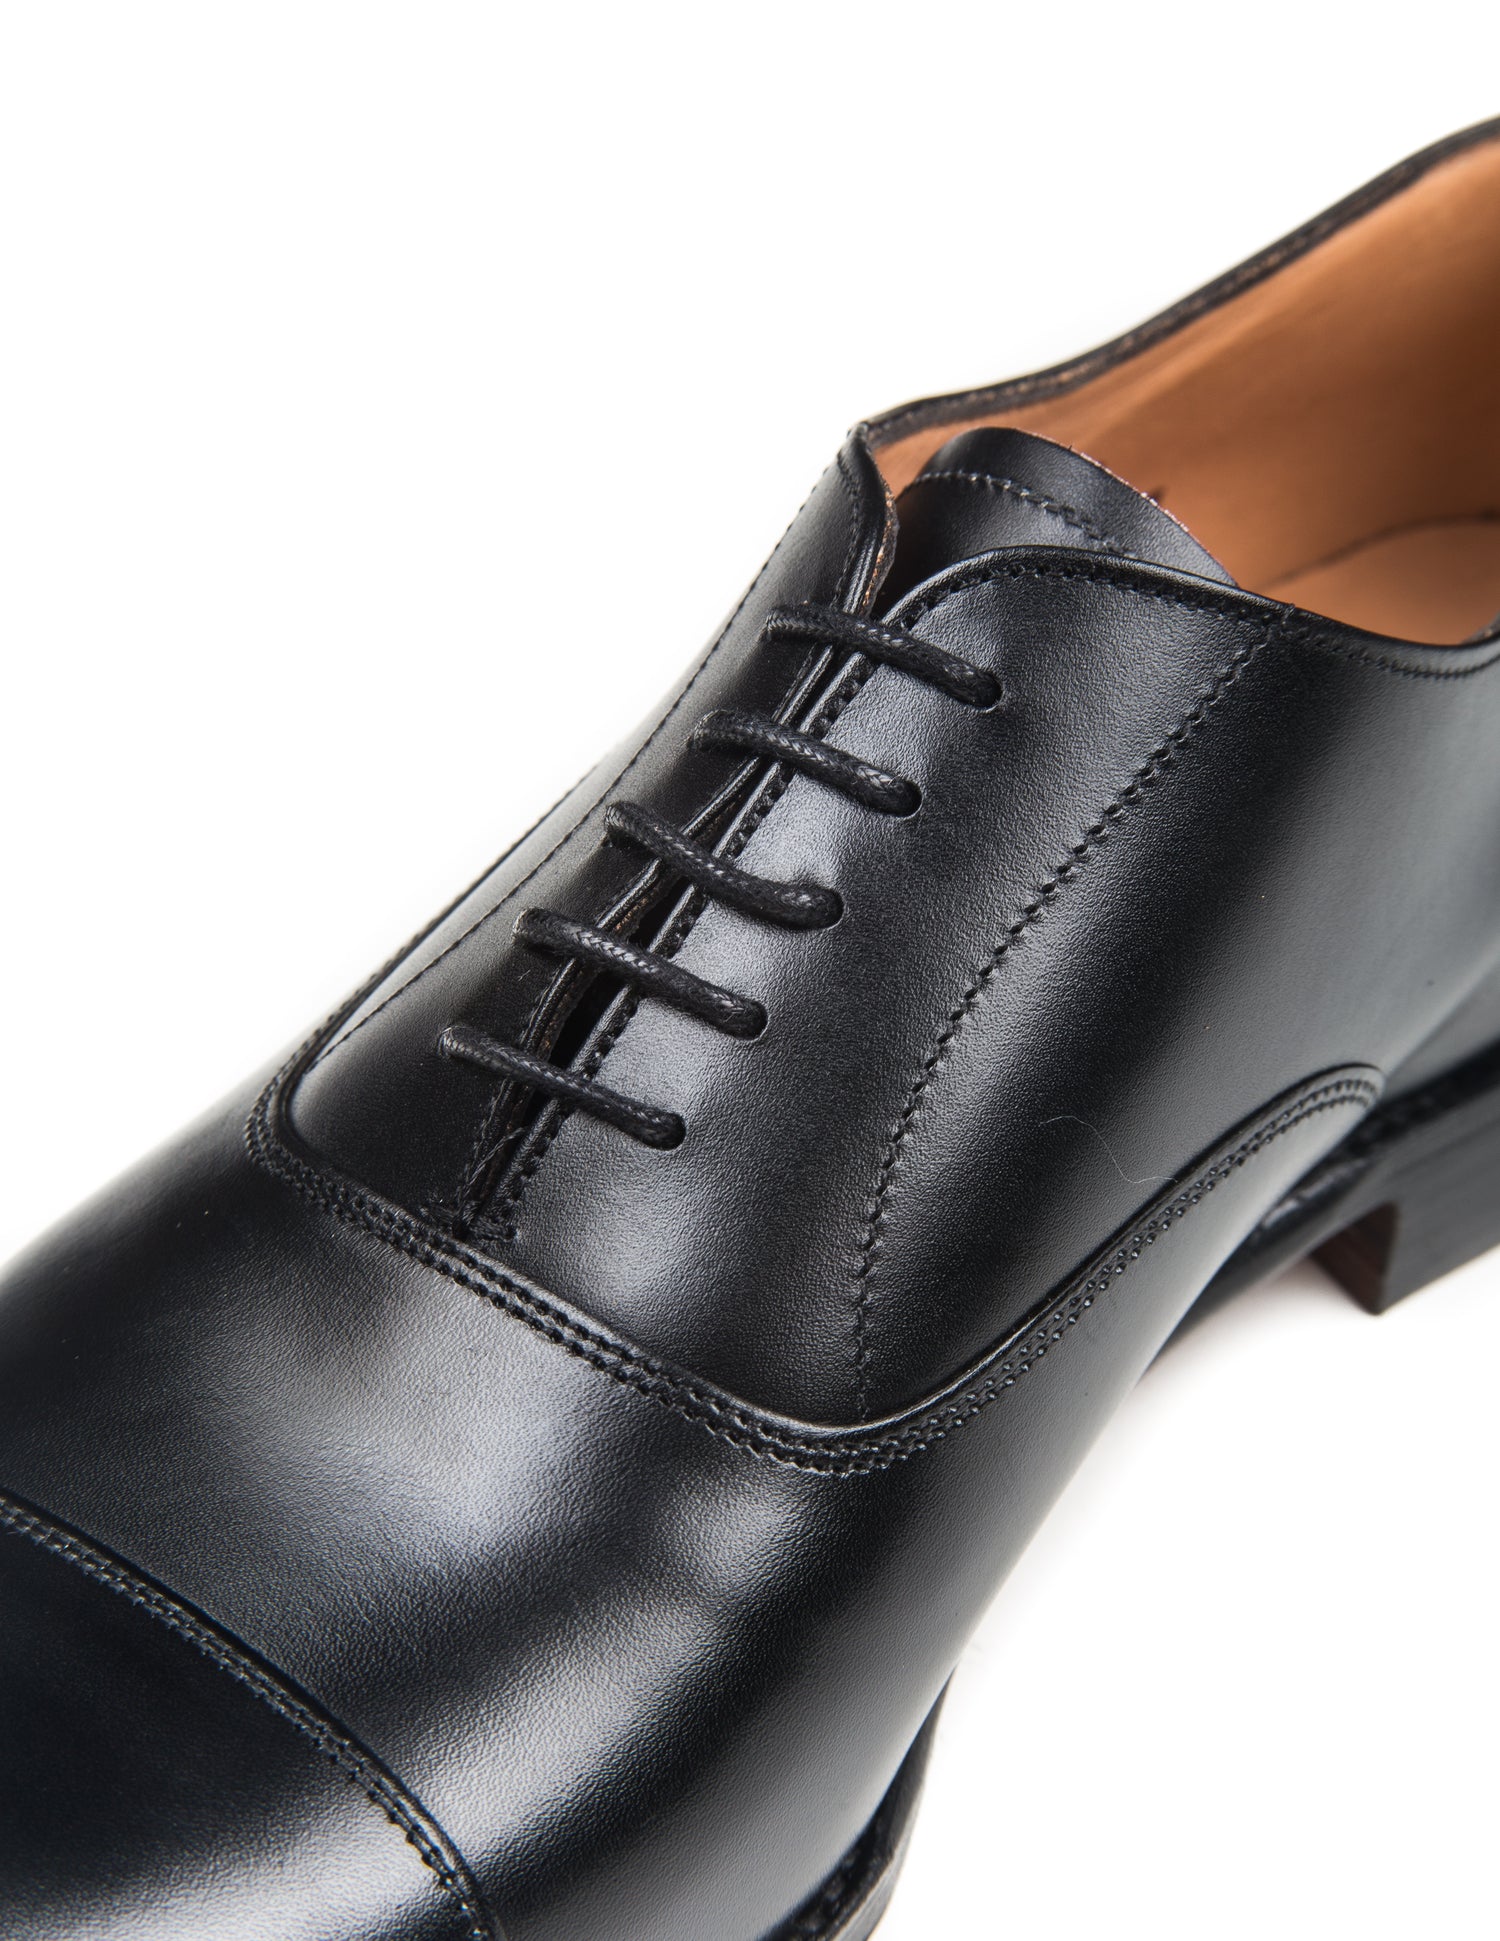 Close up of Lime Oxford Shoes in Black Calf Leather showing stitching and laces